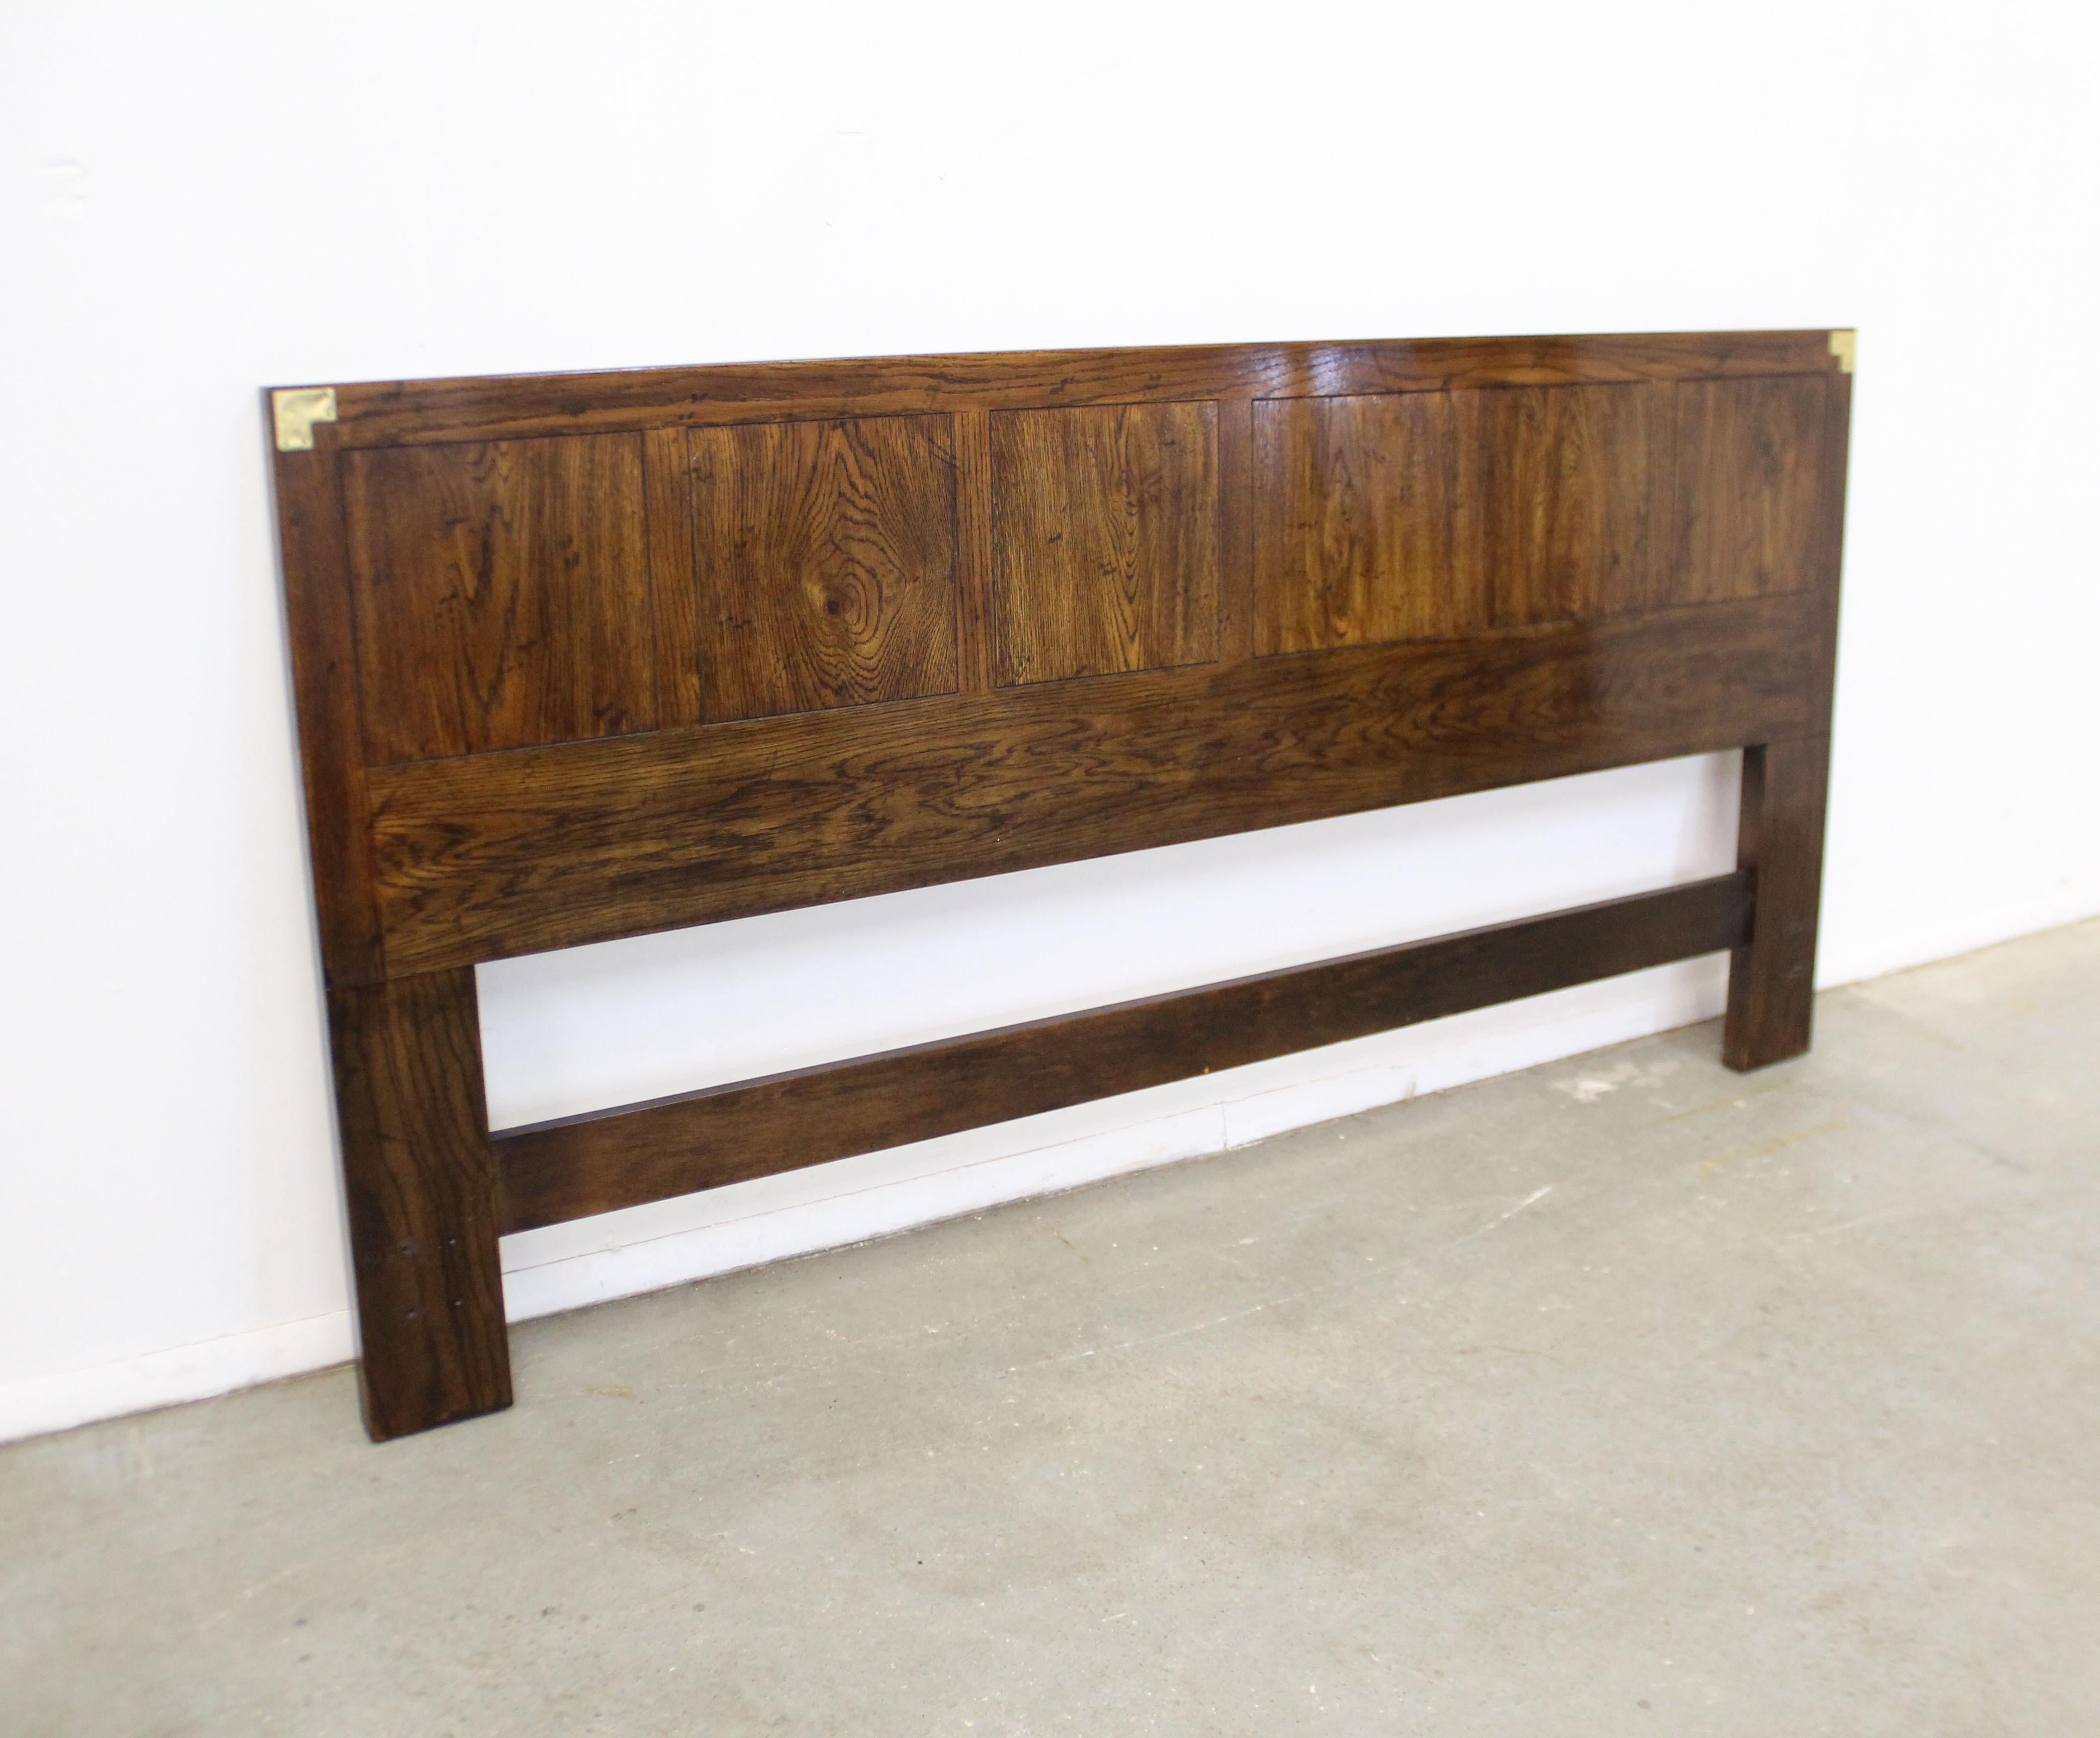 Offered is a vintage Campaign style king size headboard made by Henredon. It is made of what looks to be solid wood and has brass accents on the top corners. It is in good condition, shows slight surface scratches and chips (see photos). It is